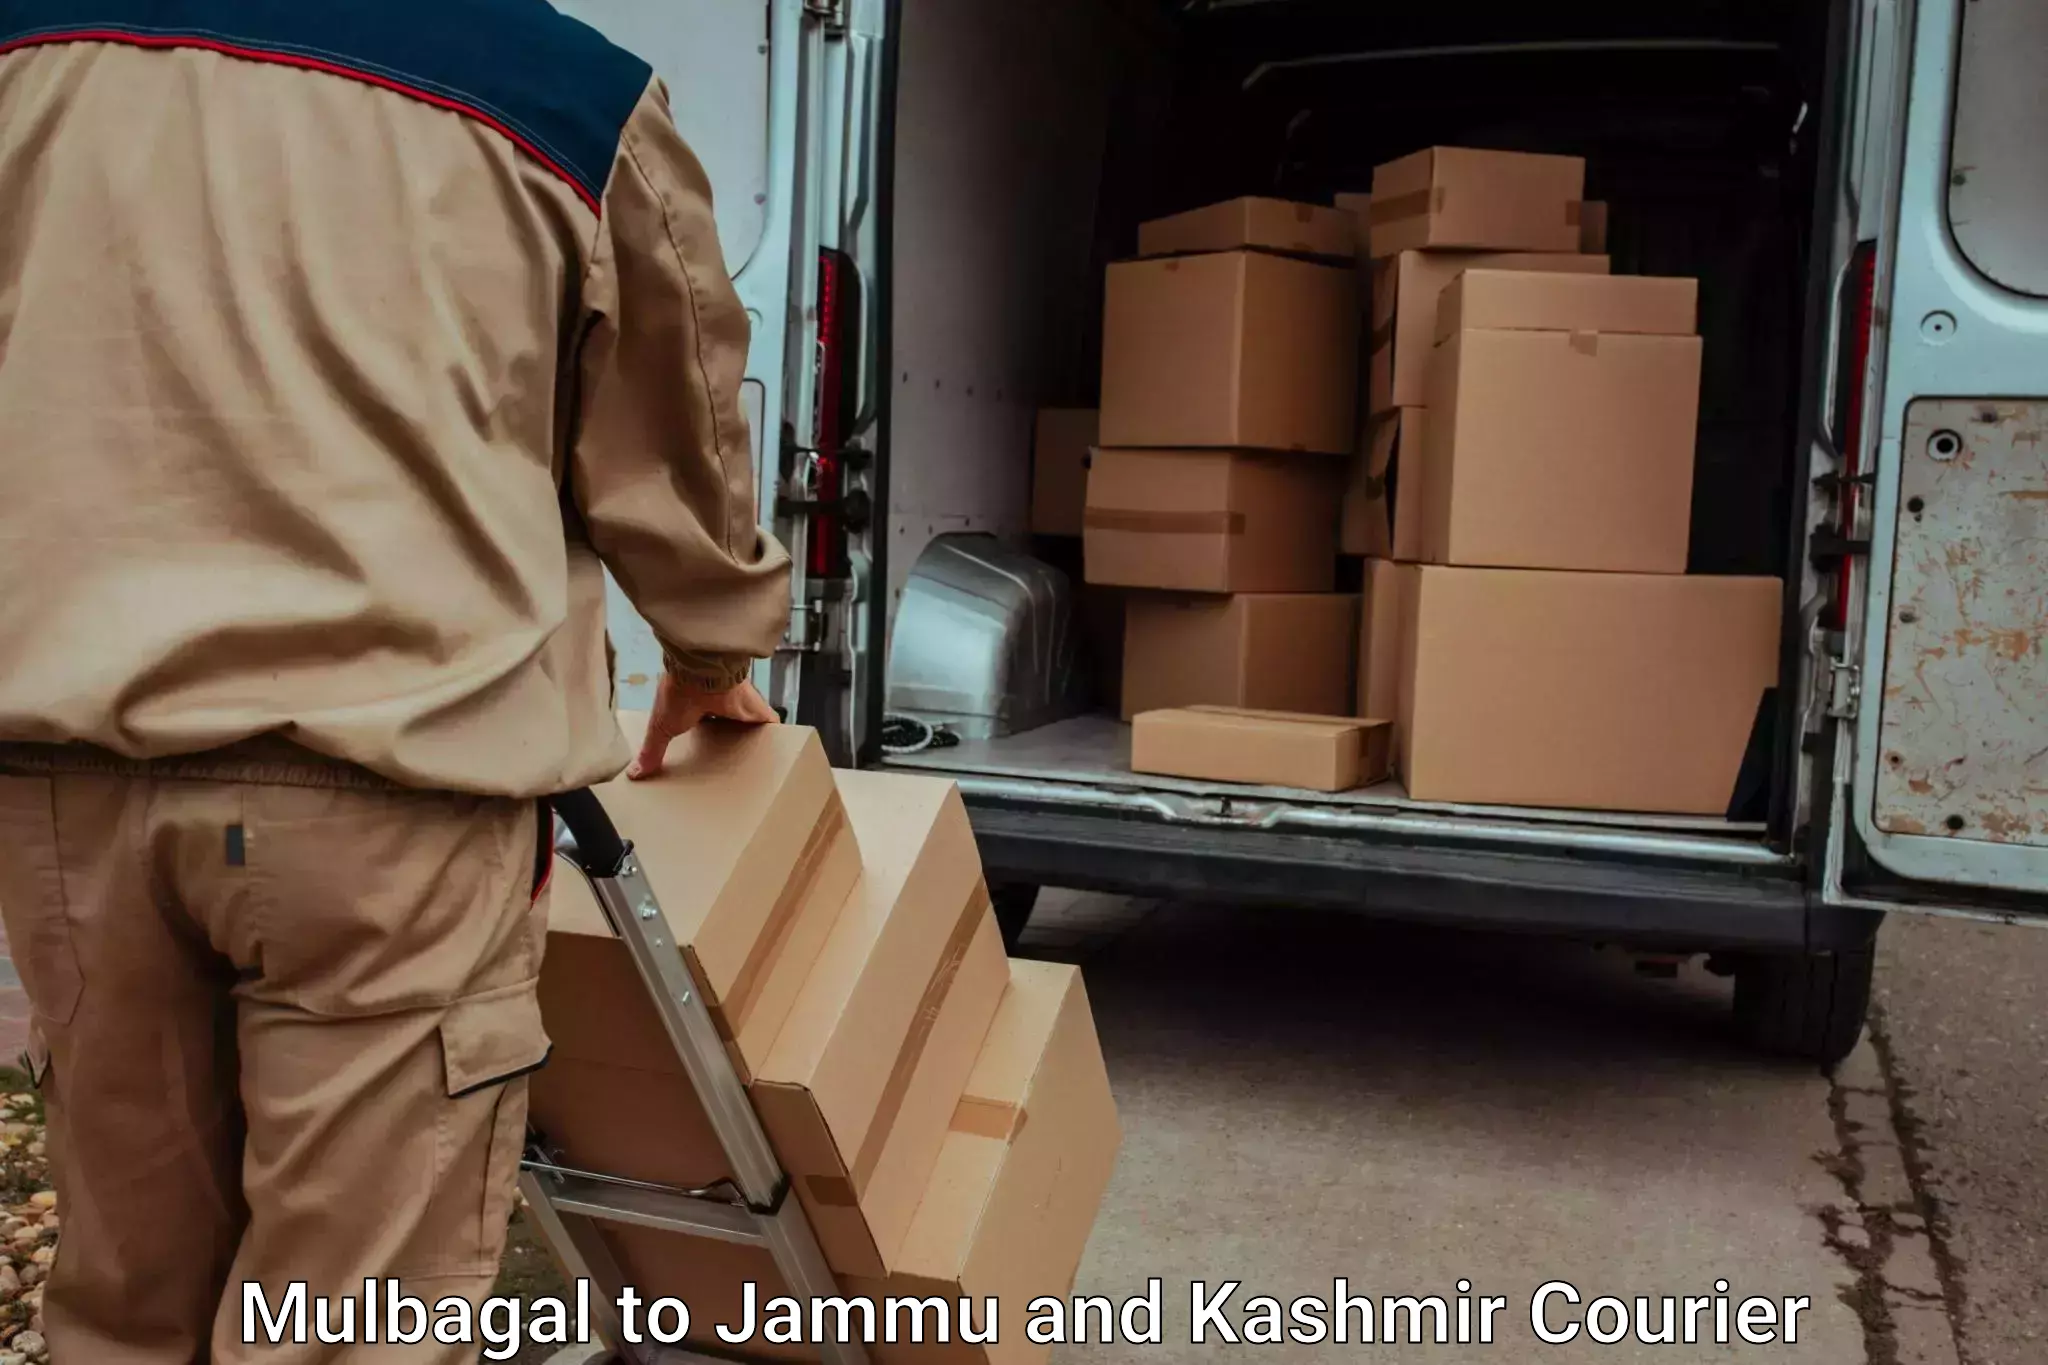 Baggage shipping experience in Mulbagal to Srinagar Kashmir